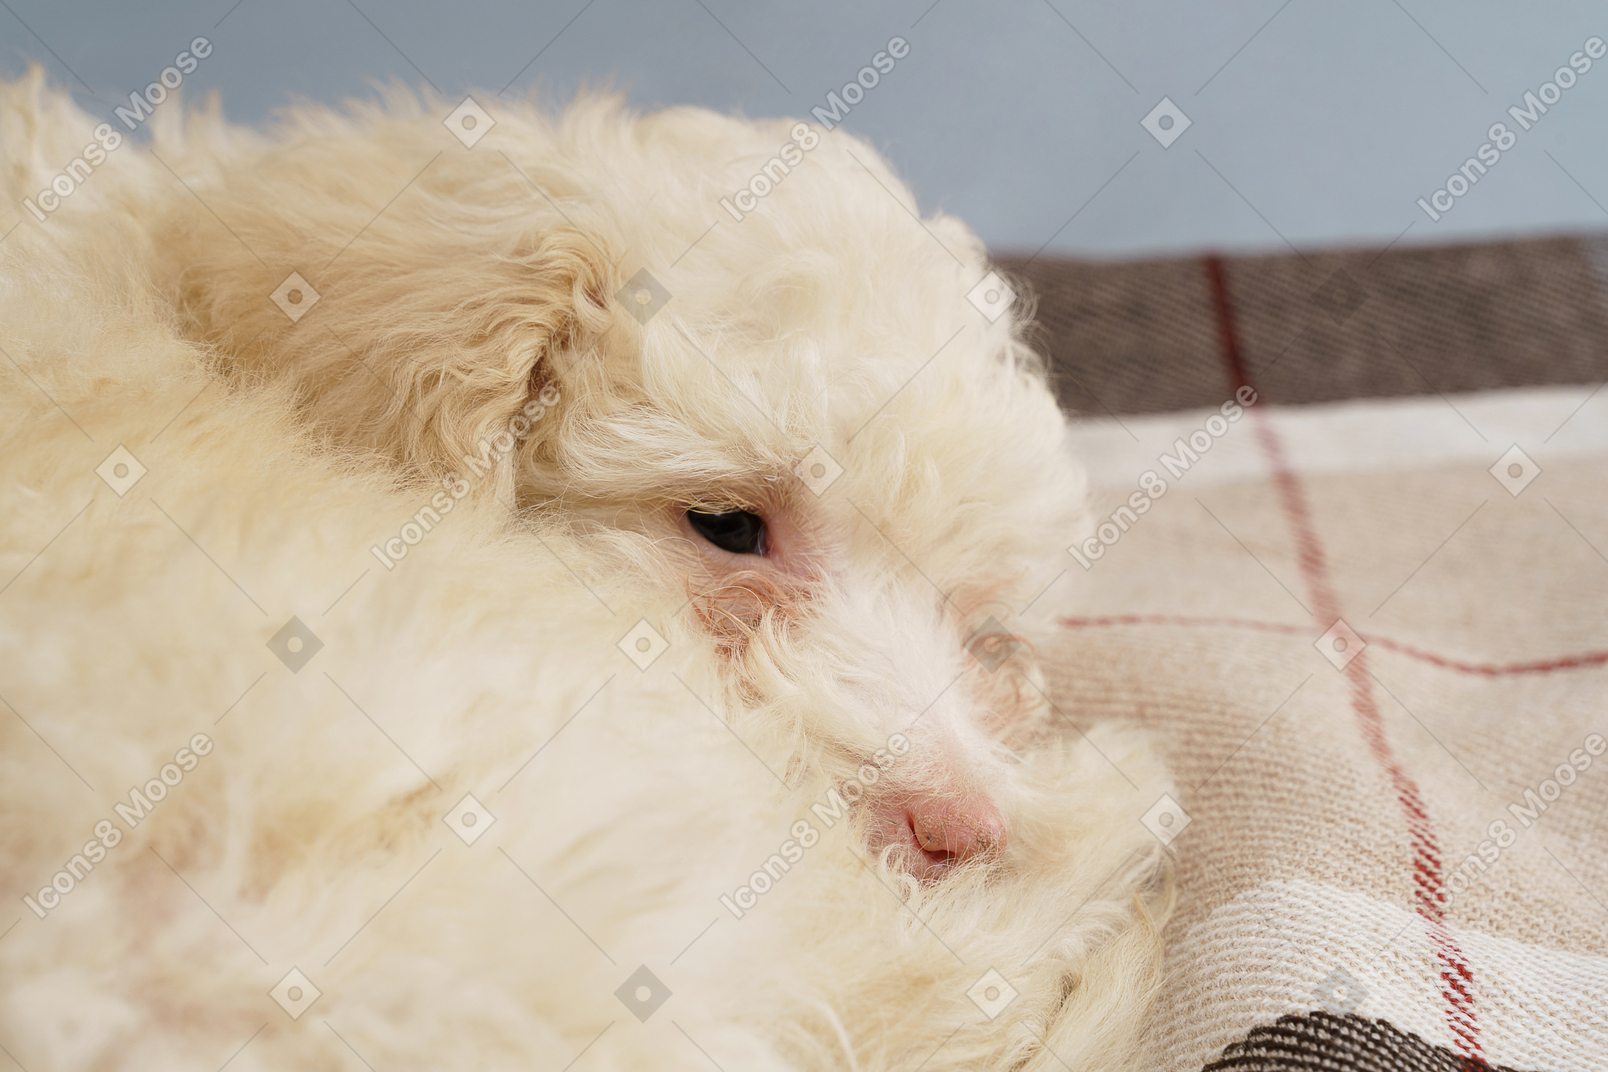 Lose-up of a white poodle lying on a checked blanket